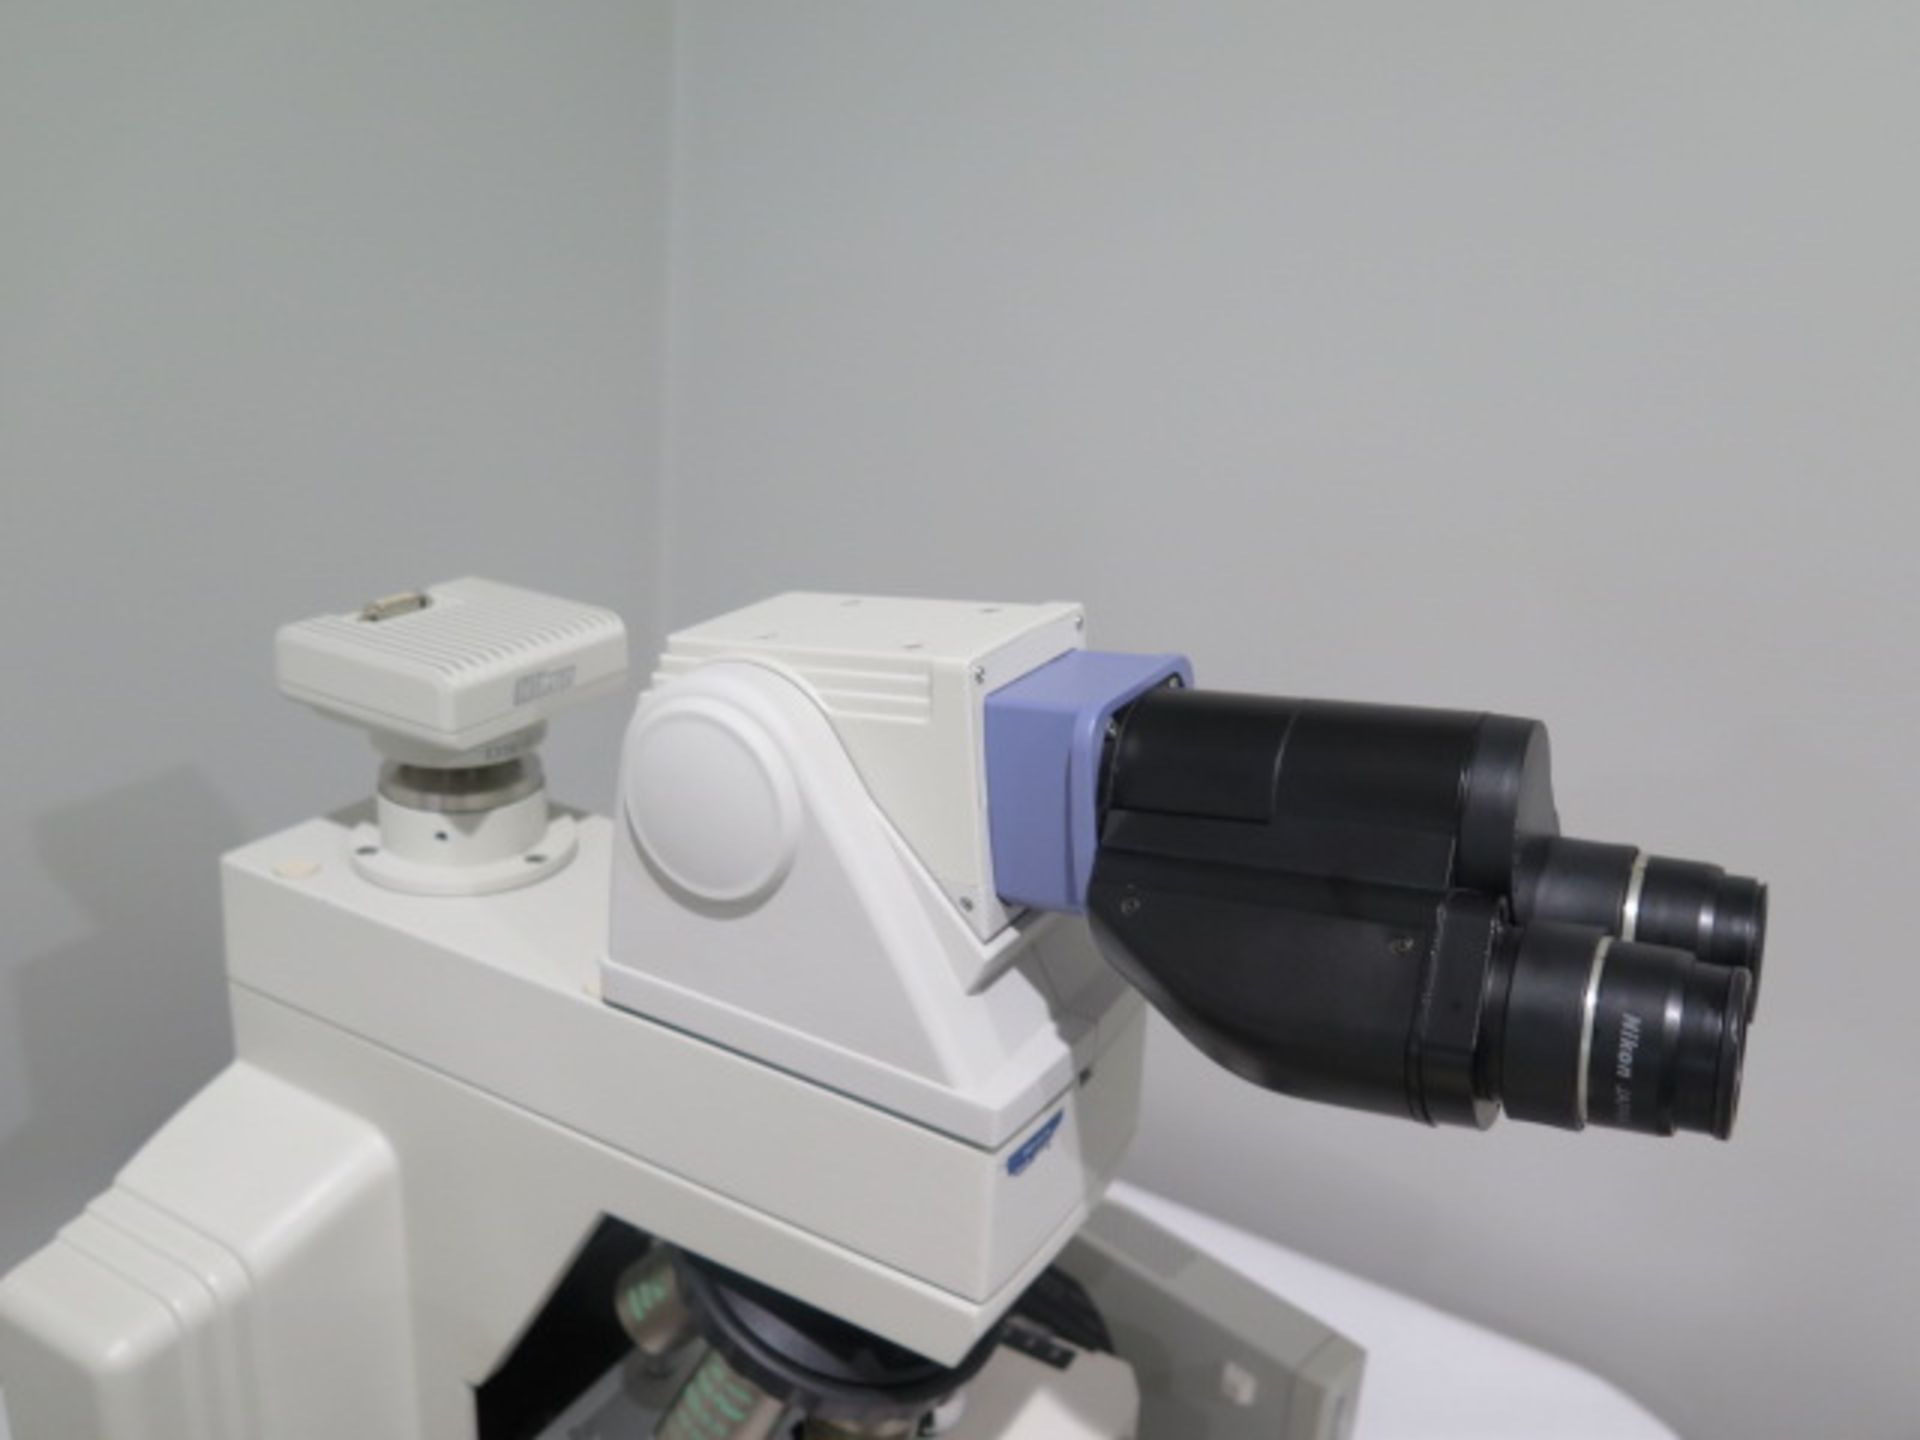 Nikon Eclipse E600 Research Microscope s/n 763673 w/ Nikon Light,DS-U2 Digital Sight Unit,SOLD AS IS - Image 8 of 15